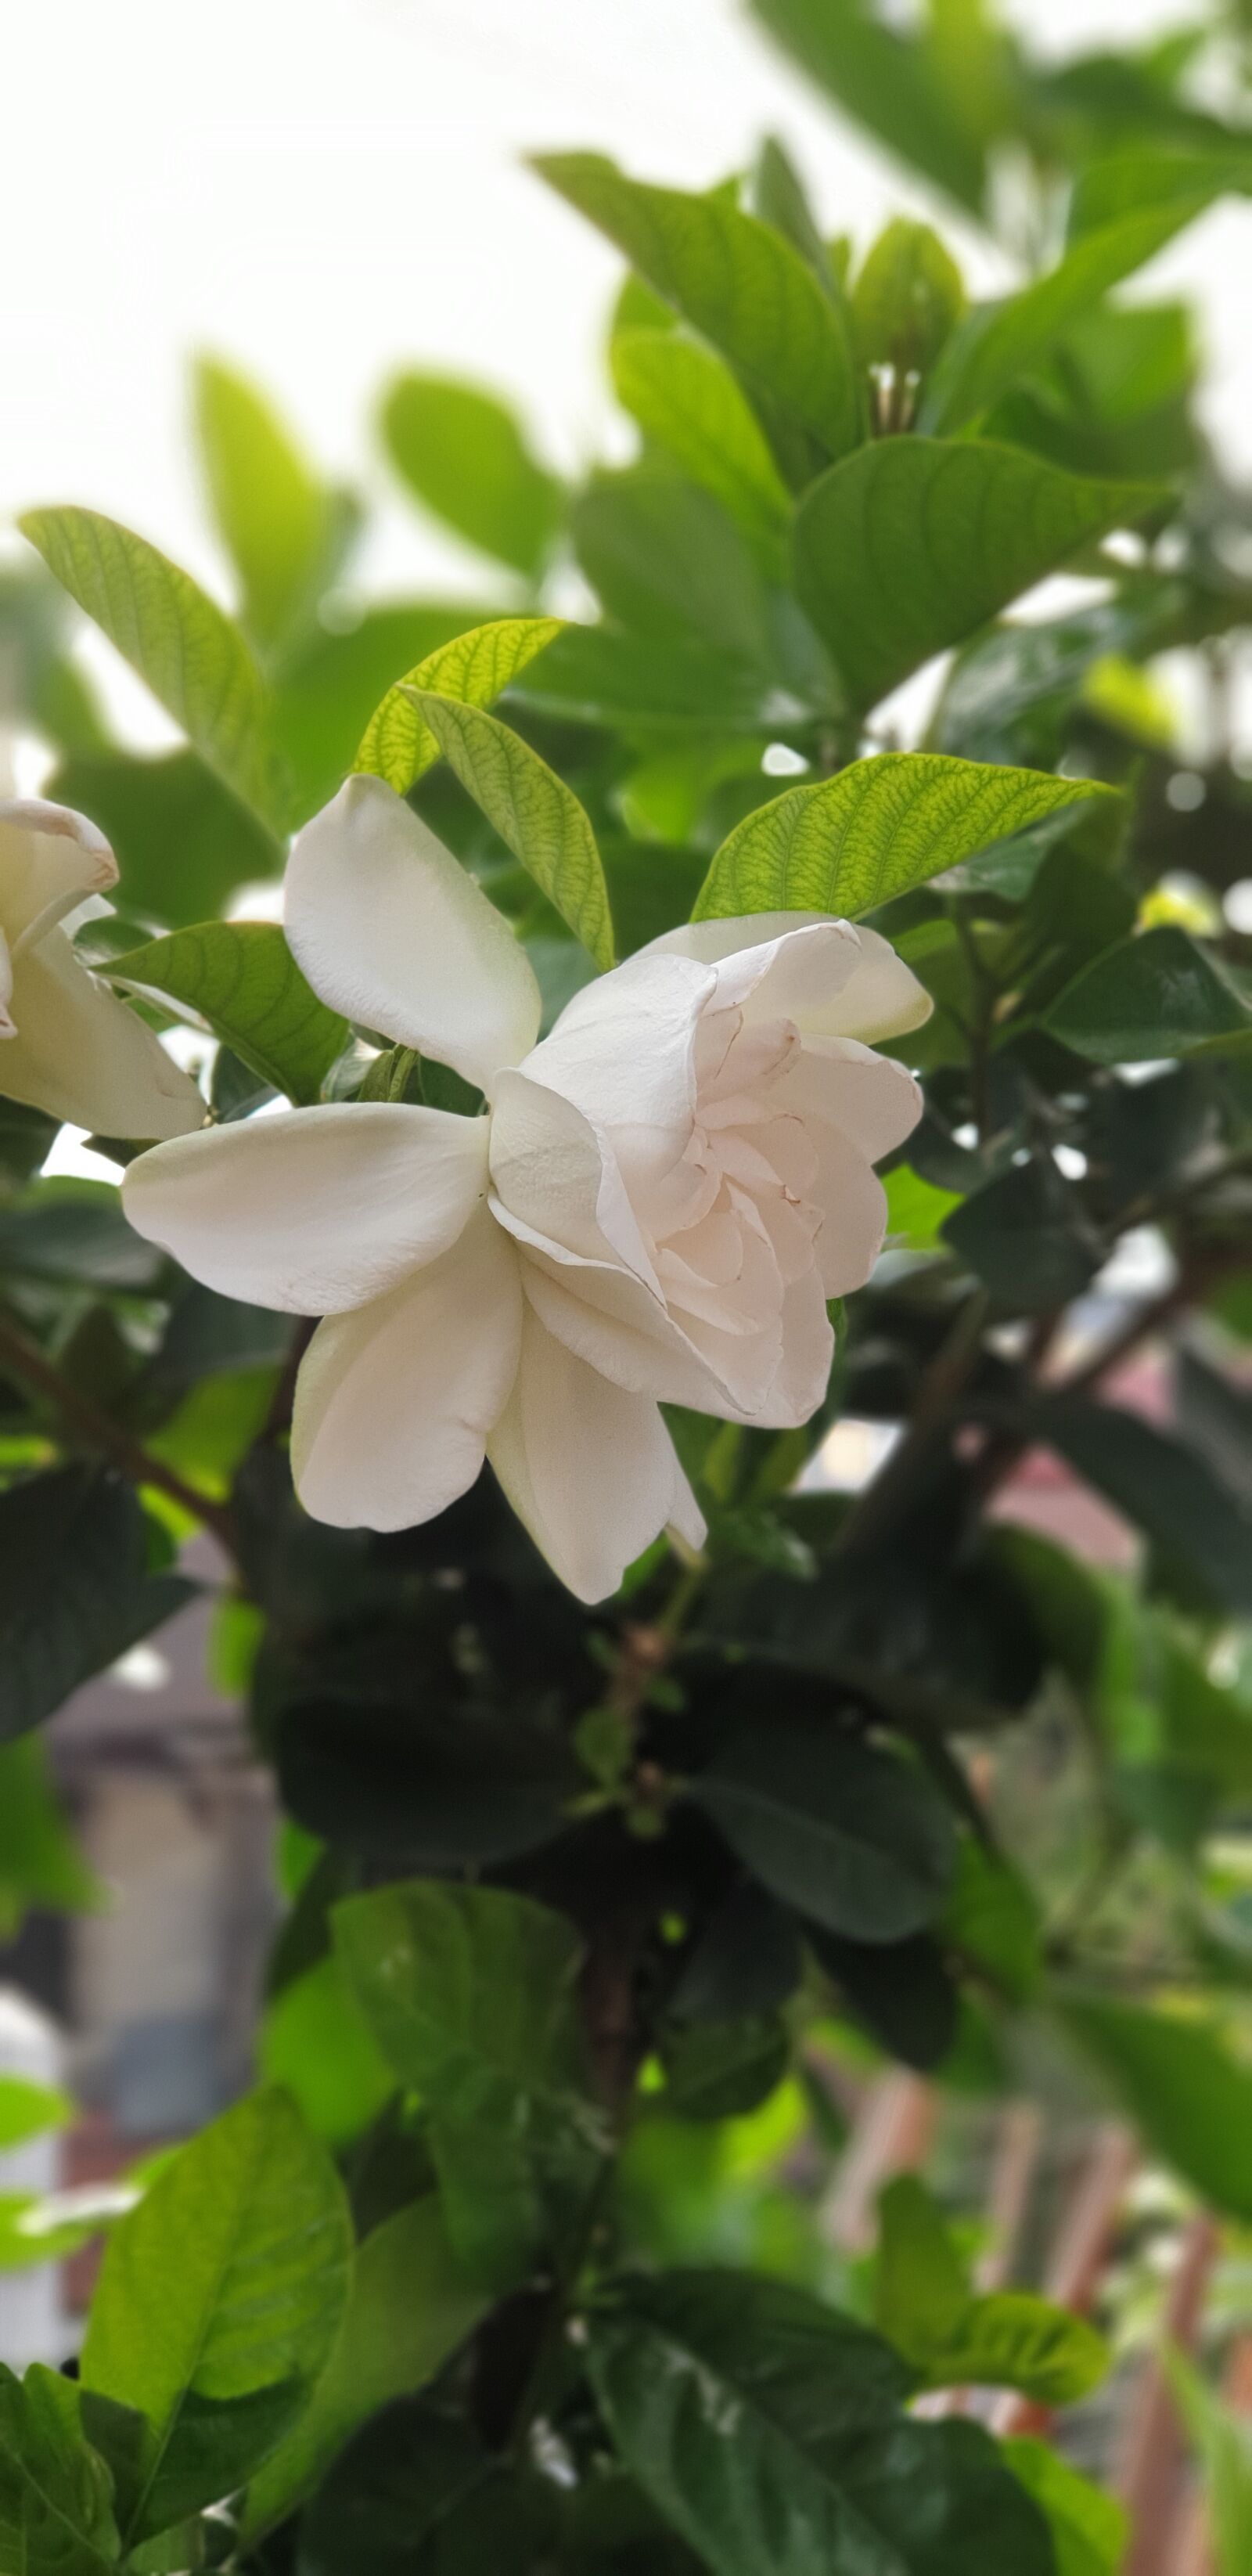 Samsung Galaxy S9+ sample photo. Flower, white, domesticated photography